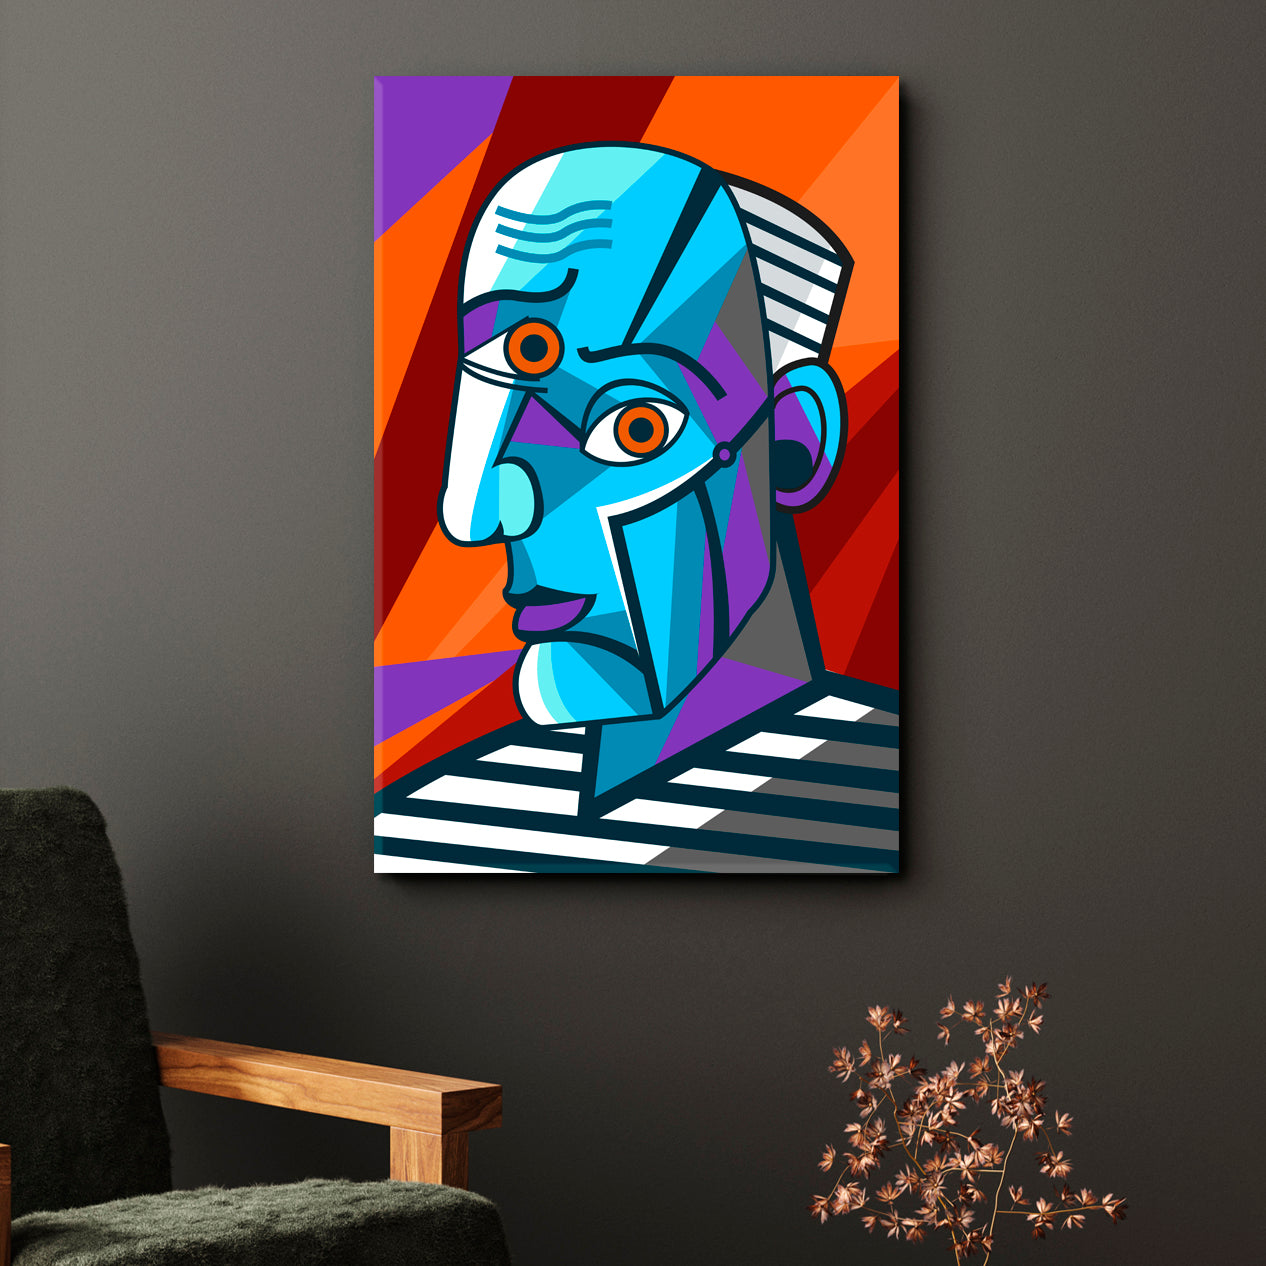 GREAT PAINTER FACE Pablo Picasso Abstract Cubism Dadaism - V Cubist Trendy Large Art Print Artesty   